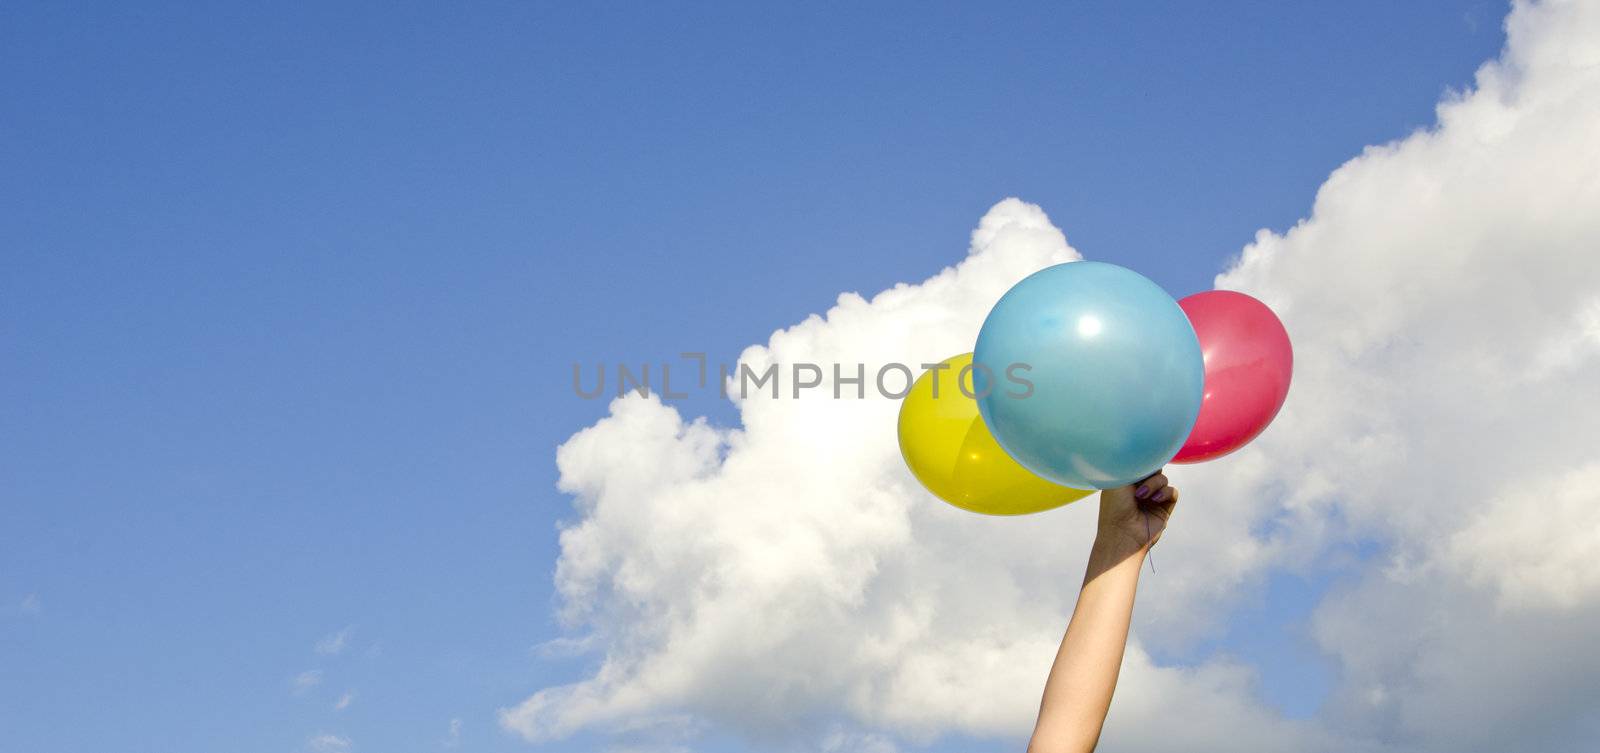 girls hand holding three colorful balloons and cloudy sky